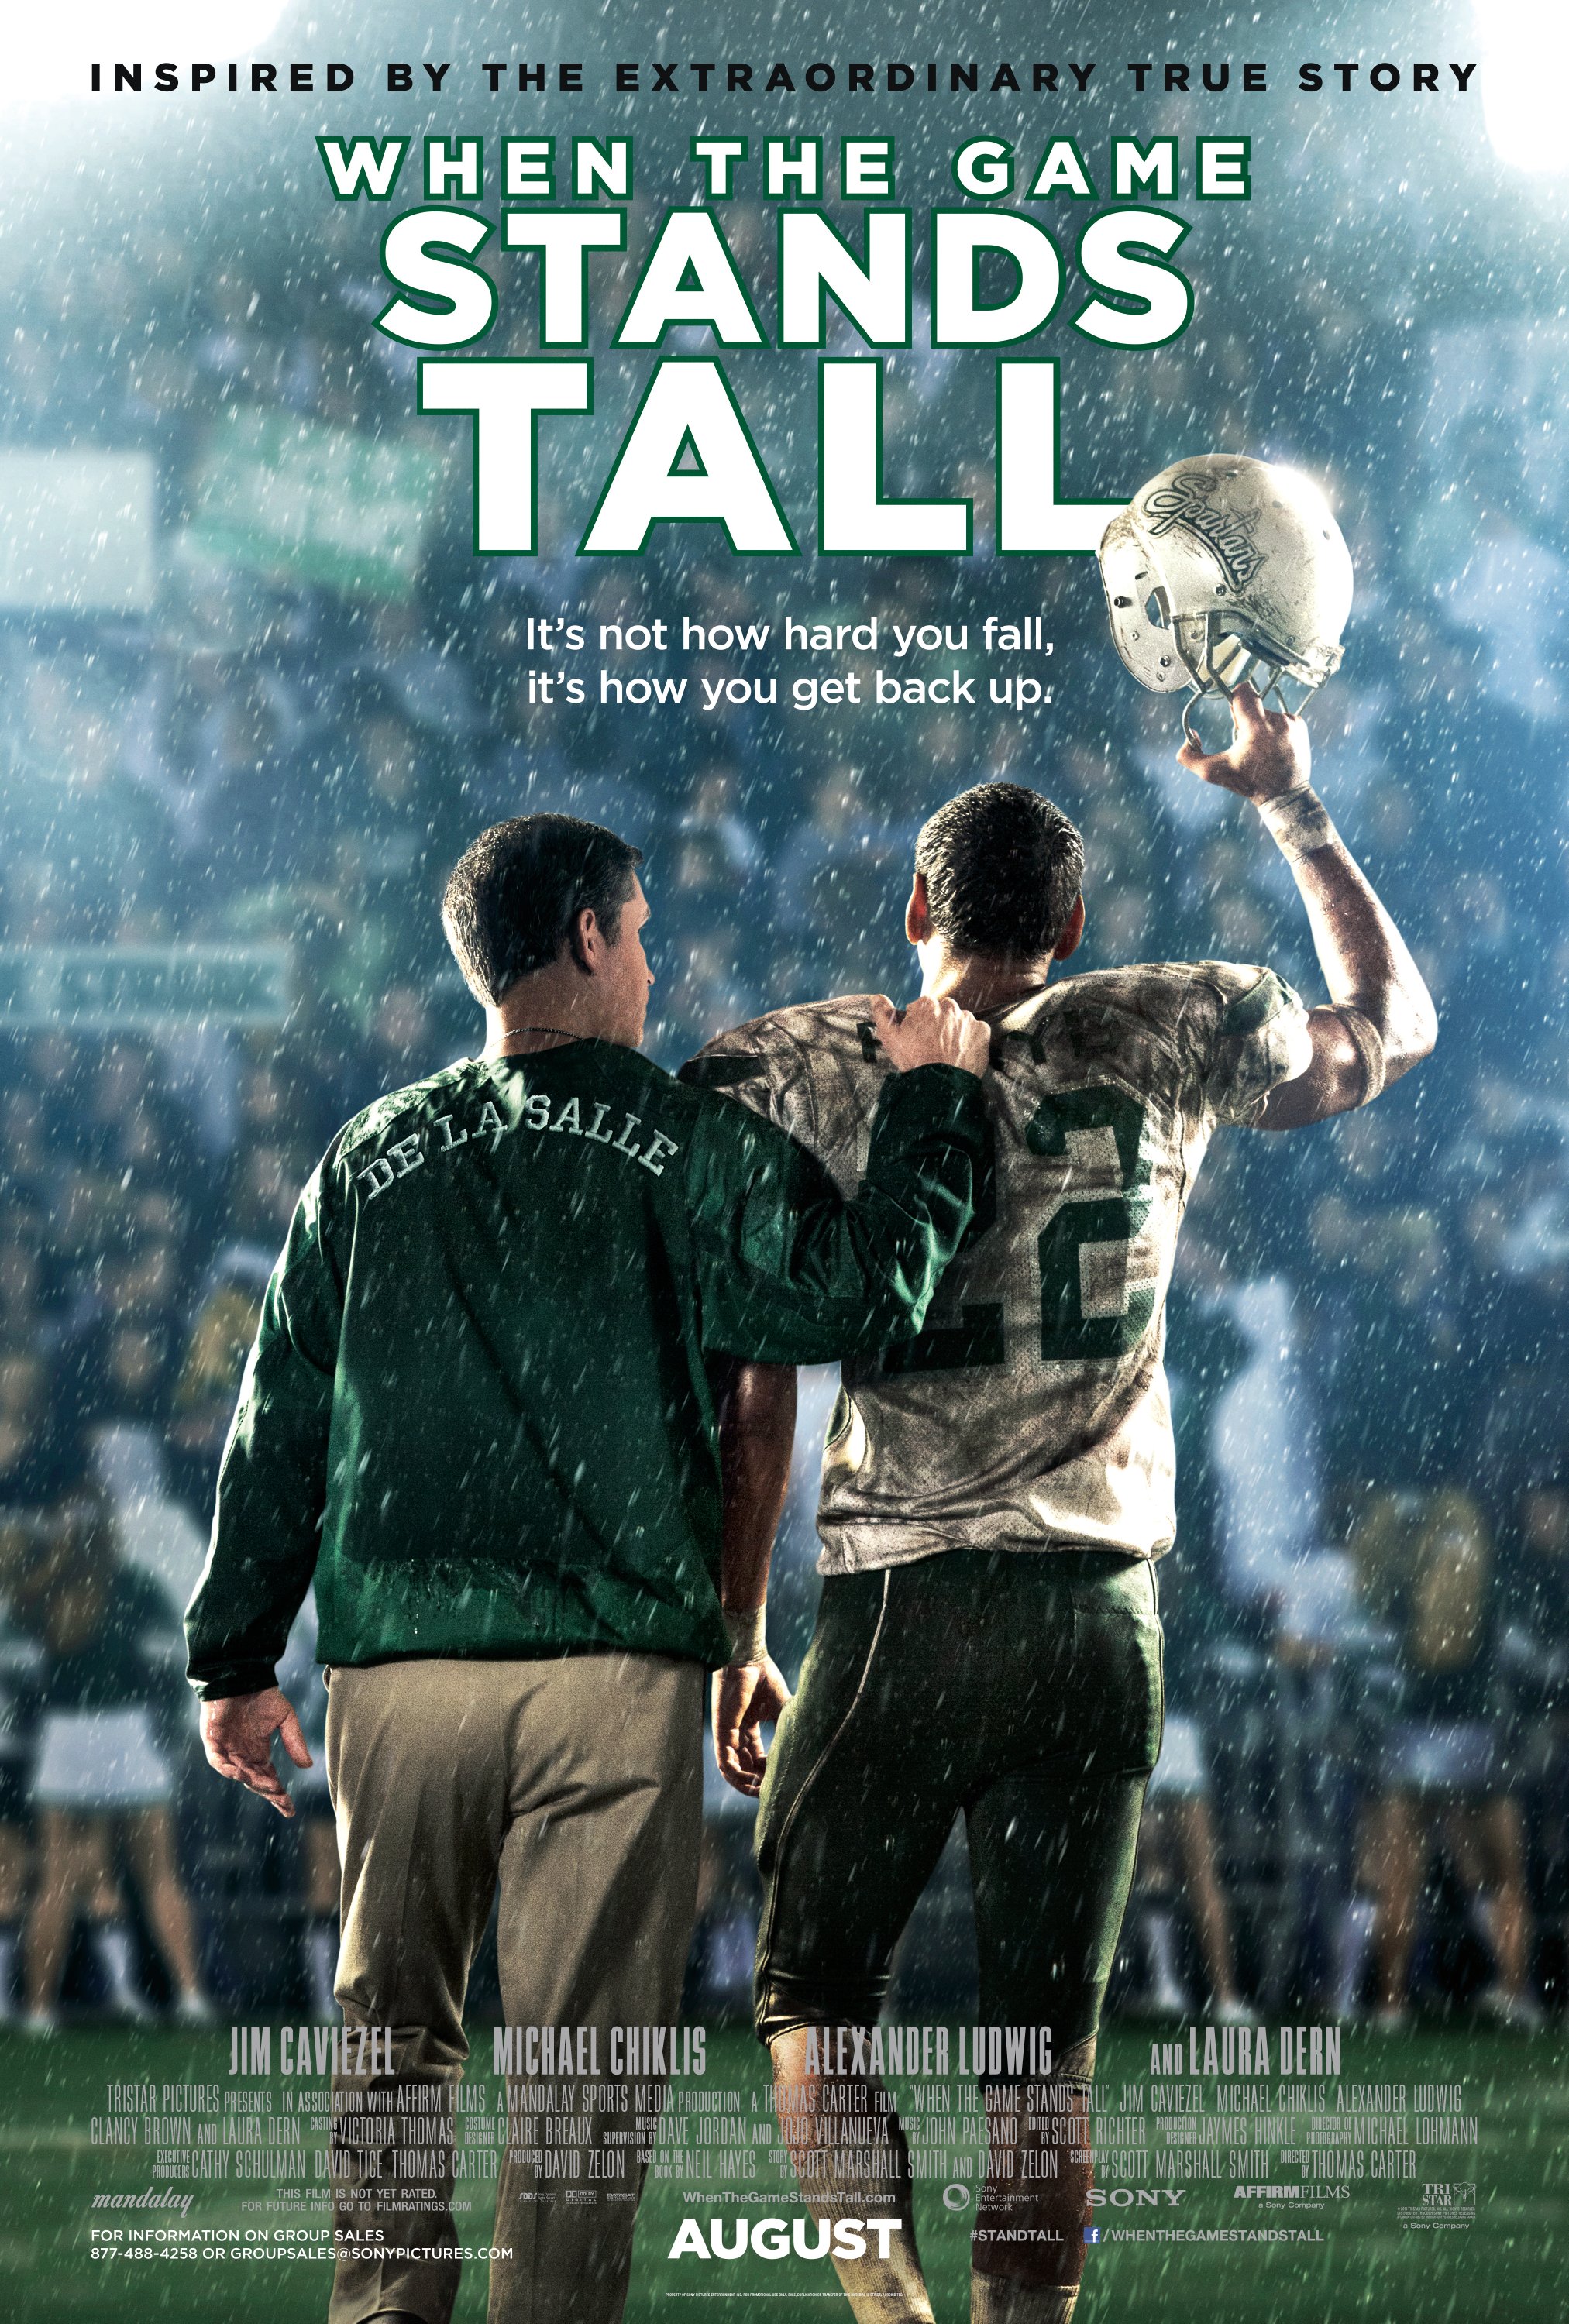 When The Games Stands Tall-Official Poster Banner PROMO-09JULHO2014-01